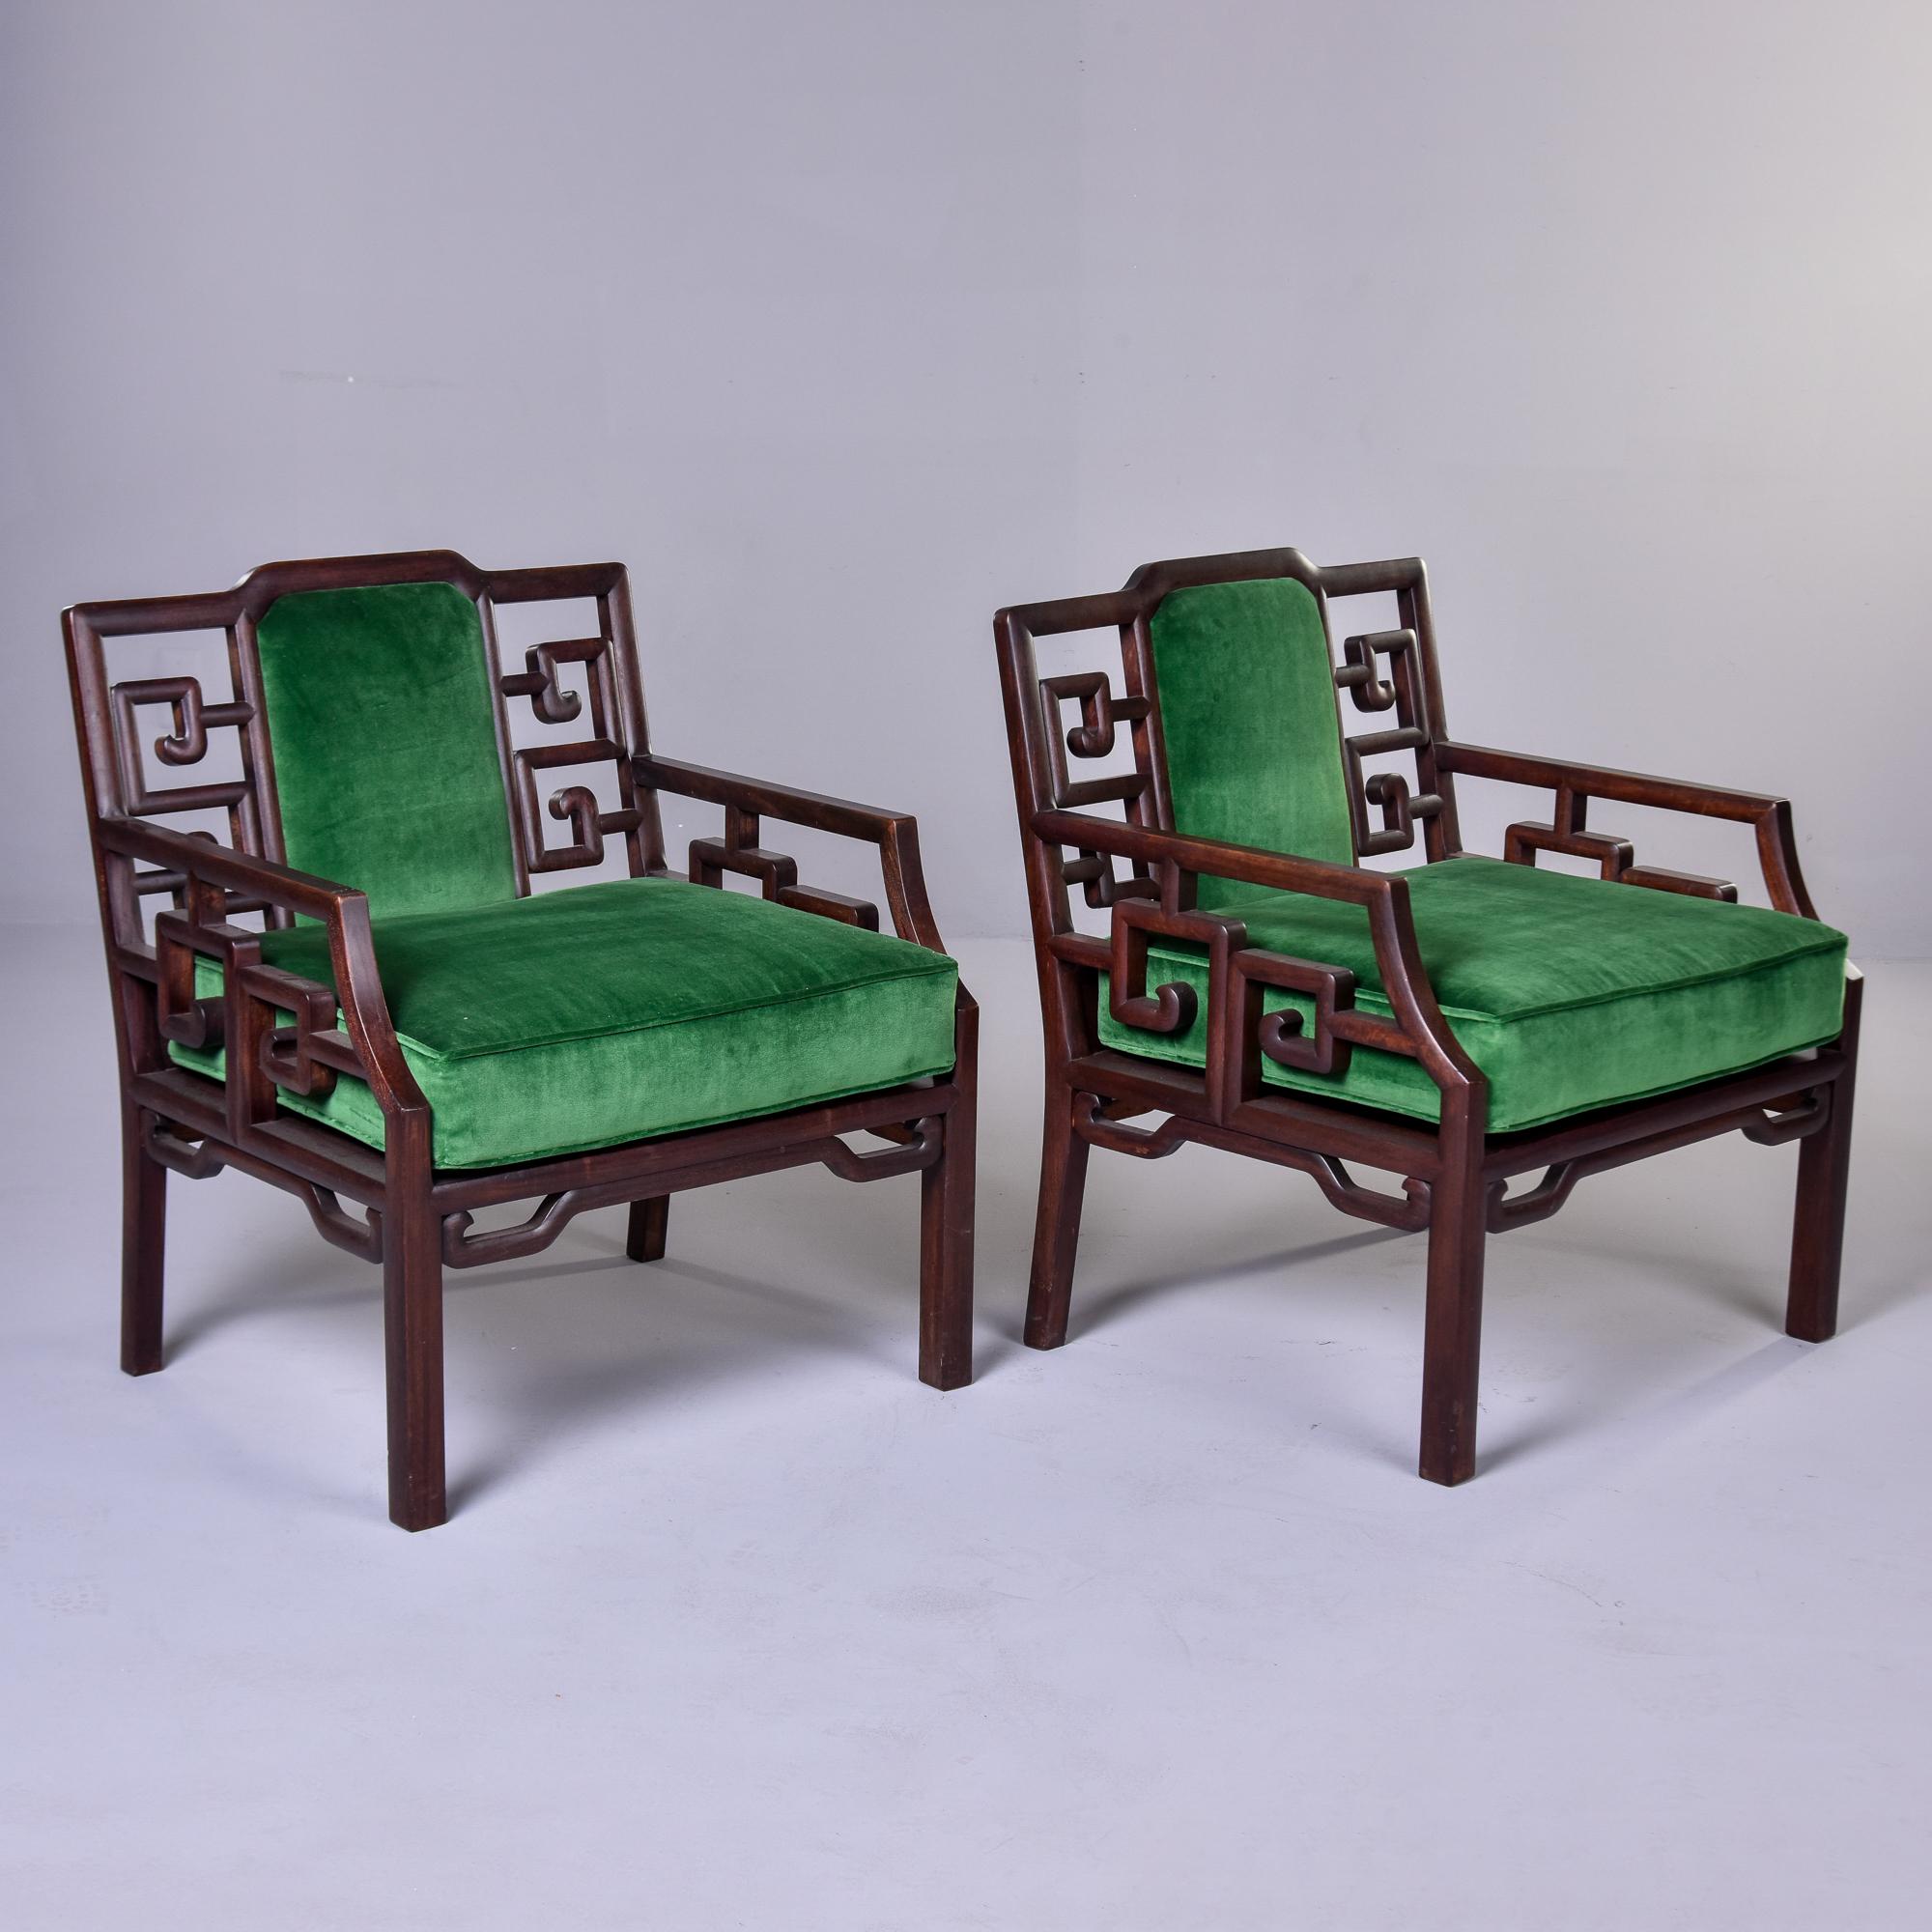 Found in the U.S., this pair of solid mahogany armchairs with rosewood veneers dates from the 1950s. Great lines and carved details in the manner of James Mont designs of the time. We don’t know who made these chairs, but they are very good quality